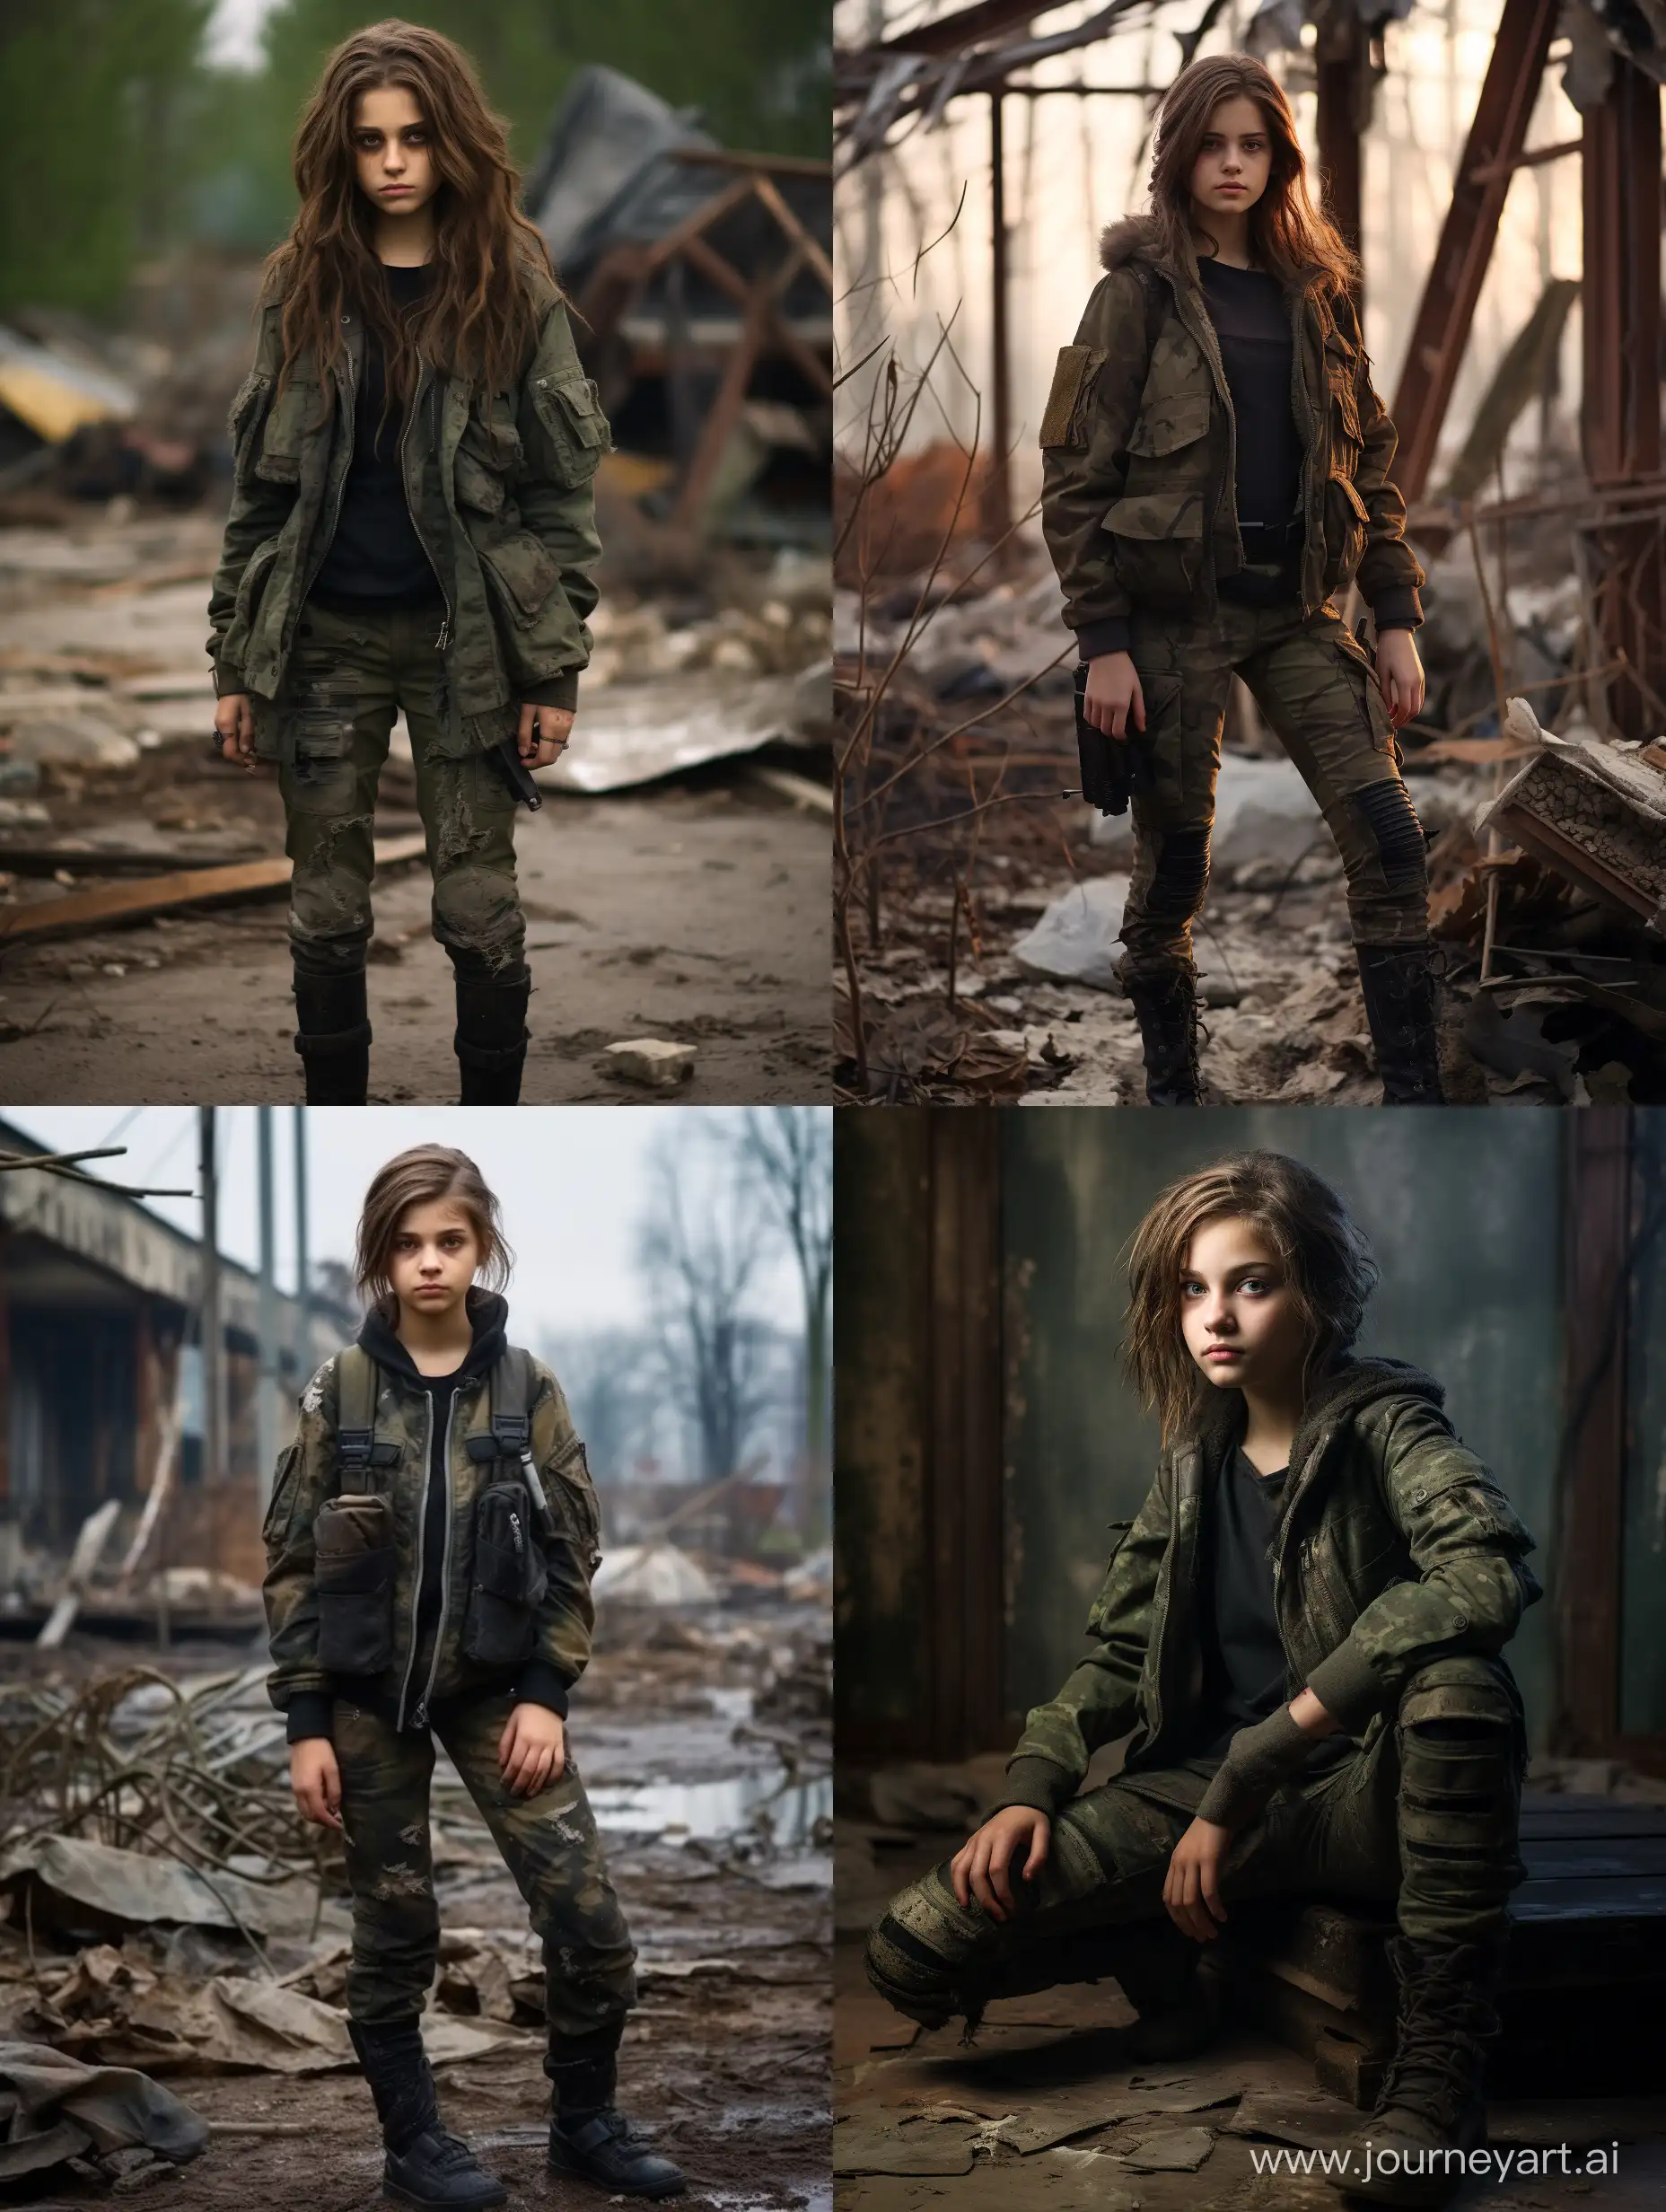 Post-Apocalypse, office, Communist winter clothes military uniforms, кубинский революционер, tomboy in uniform, pretty 15 year old woman, tomboy, full body, military camouflage tight leggings, Photos 8K, modern military uniform, solo, without weapon